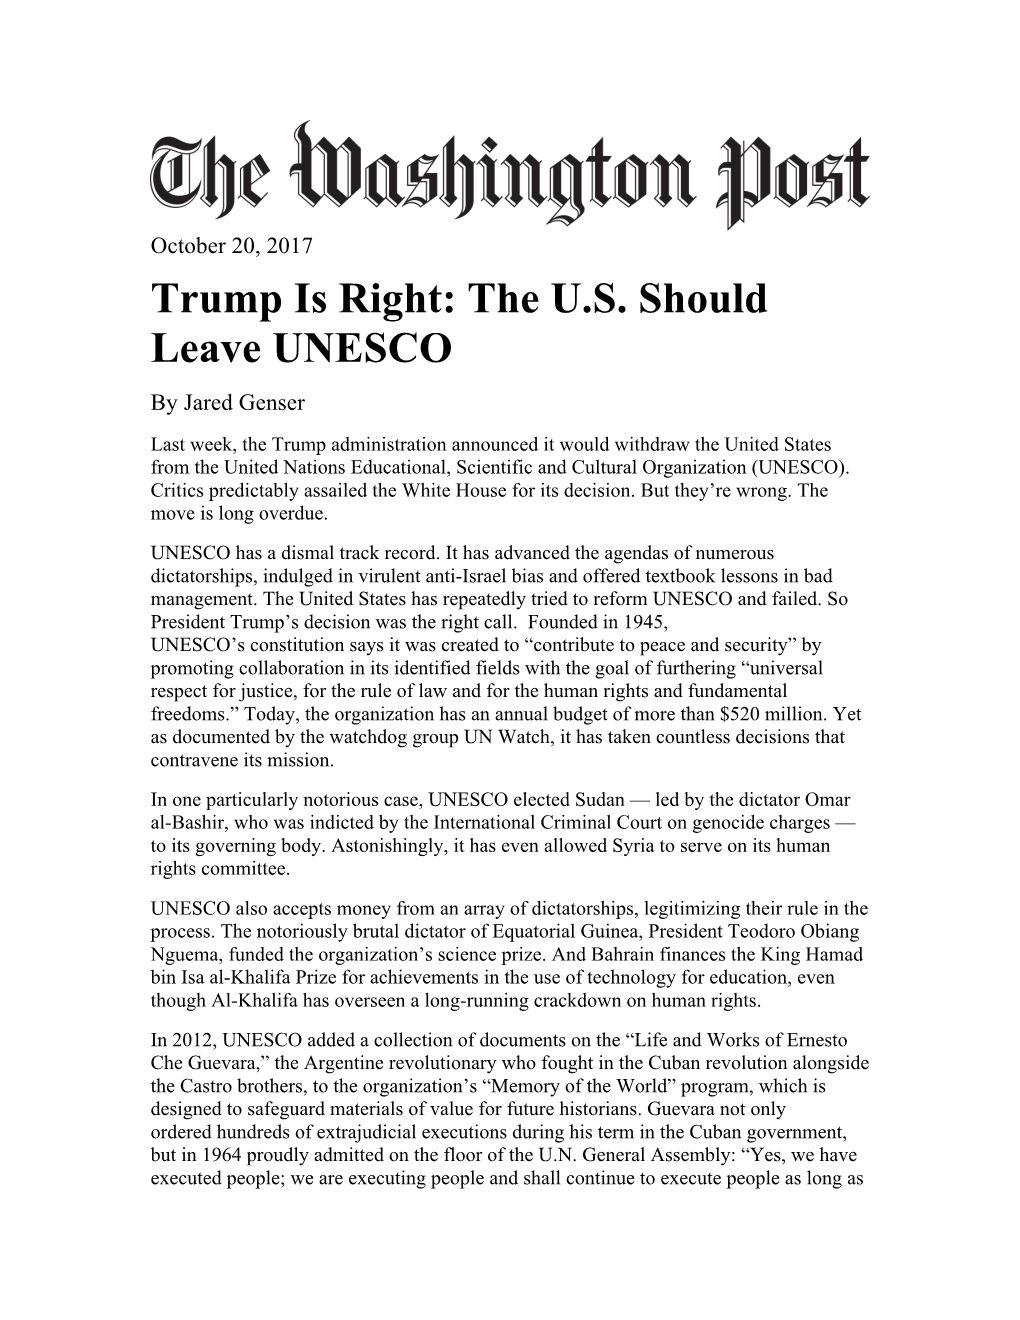 Trump Is Right: the U.S. Should Leave UNESCO